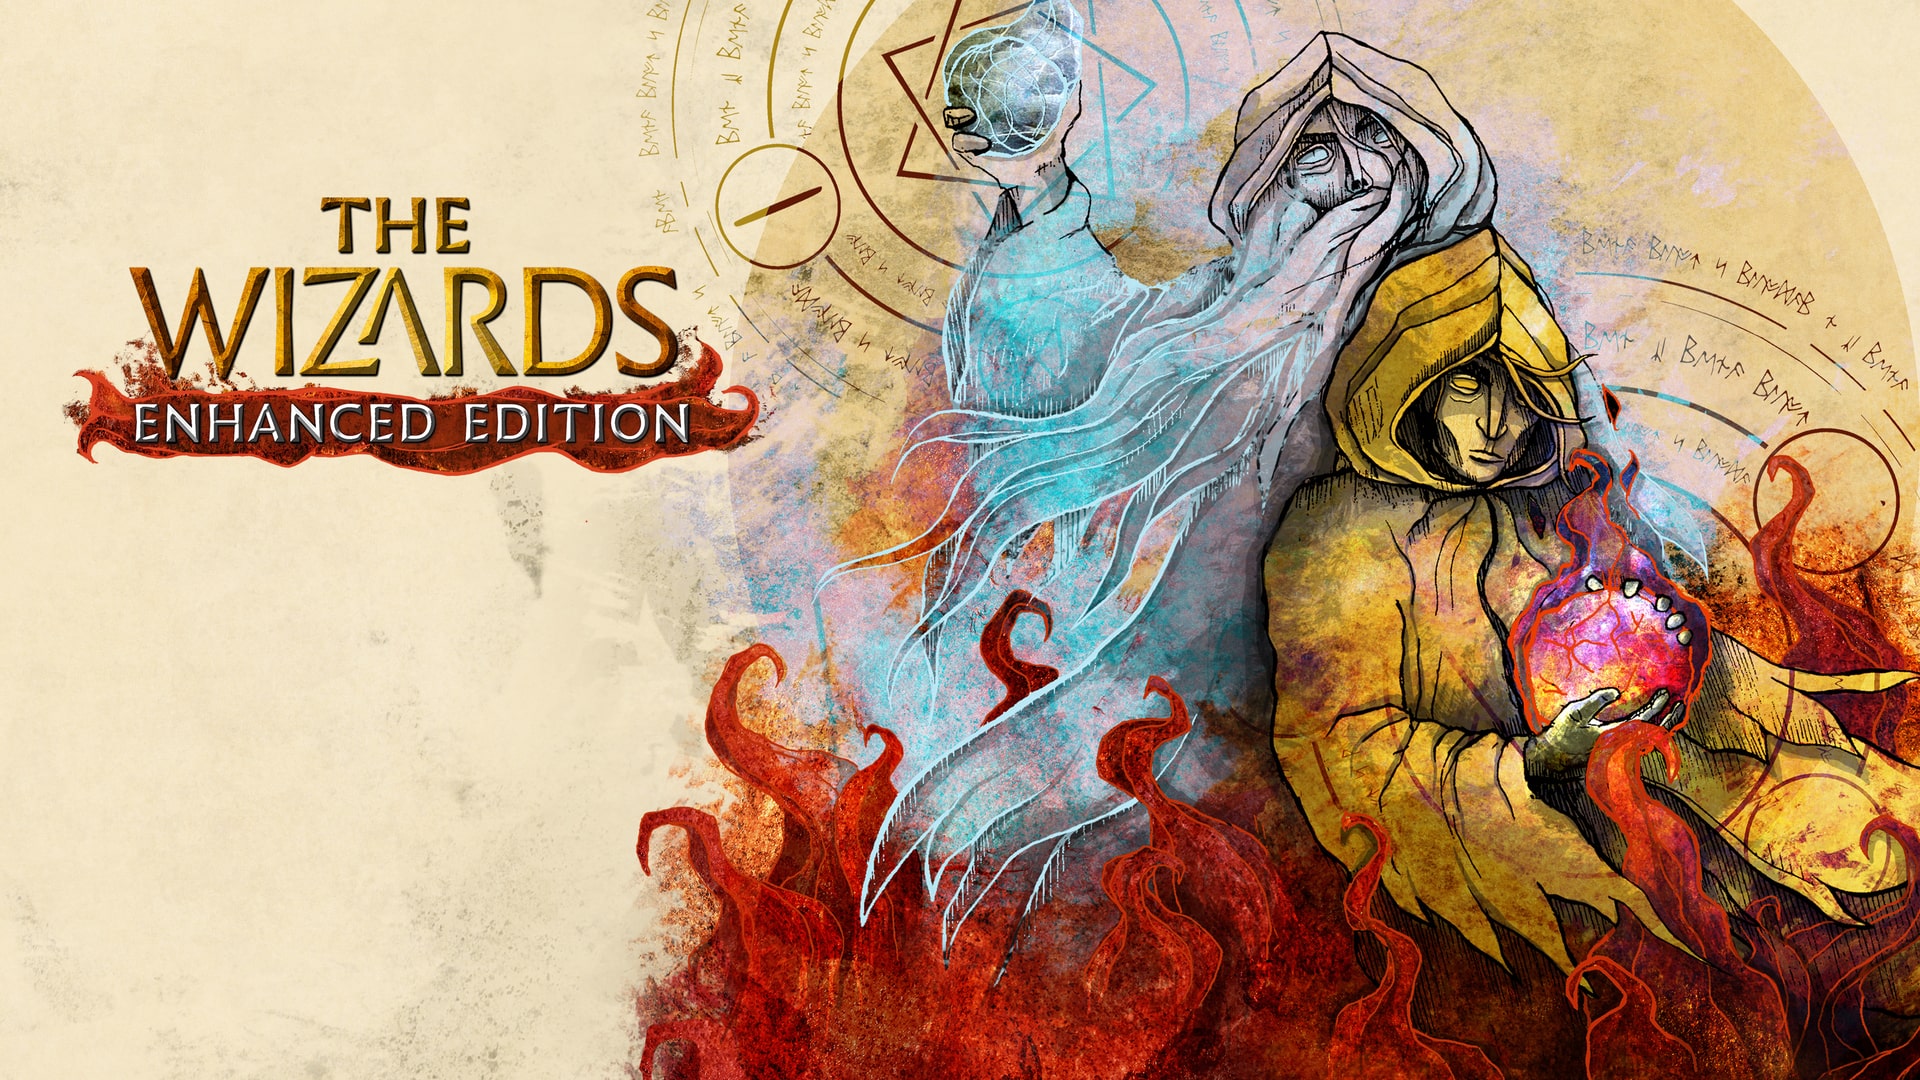 The Wizards - Enhanced Edition (English/Chinese/Korean/Japanese Ver.)